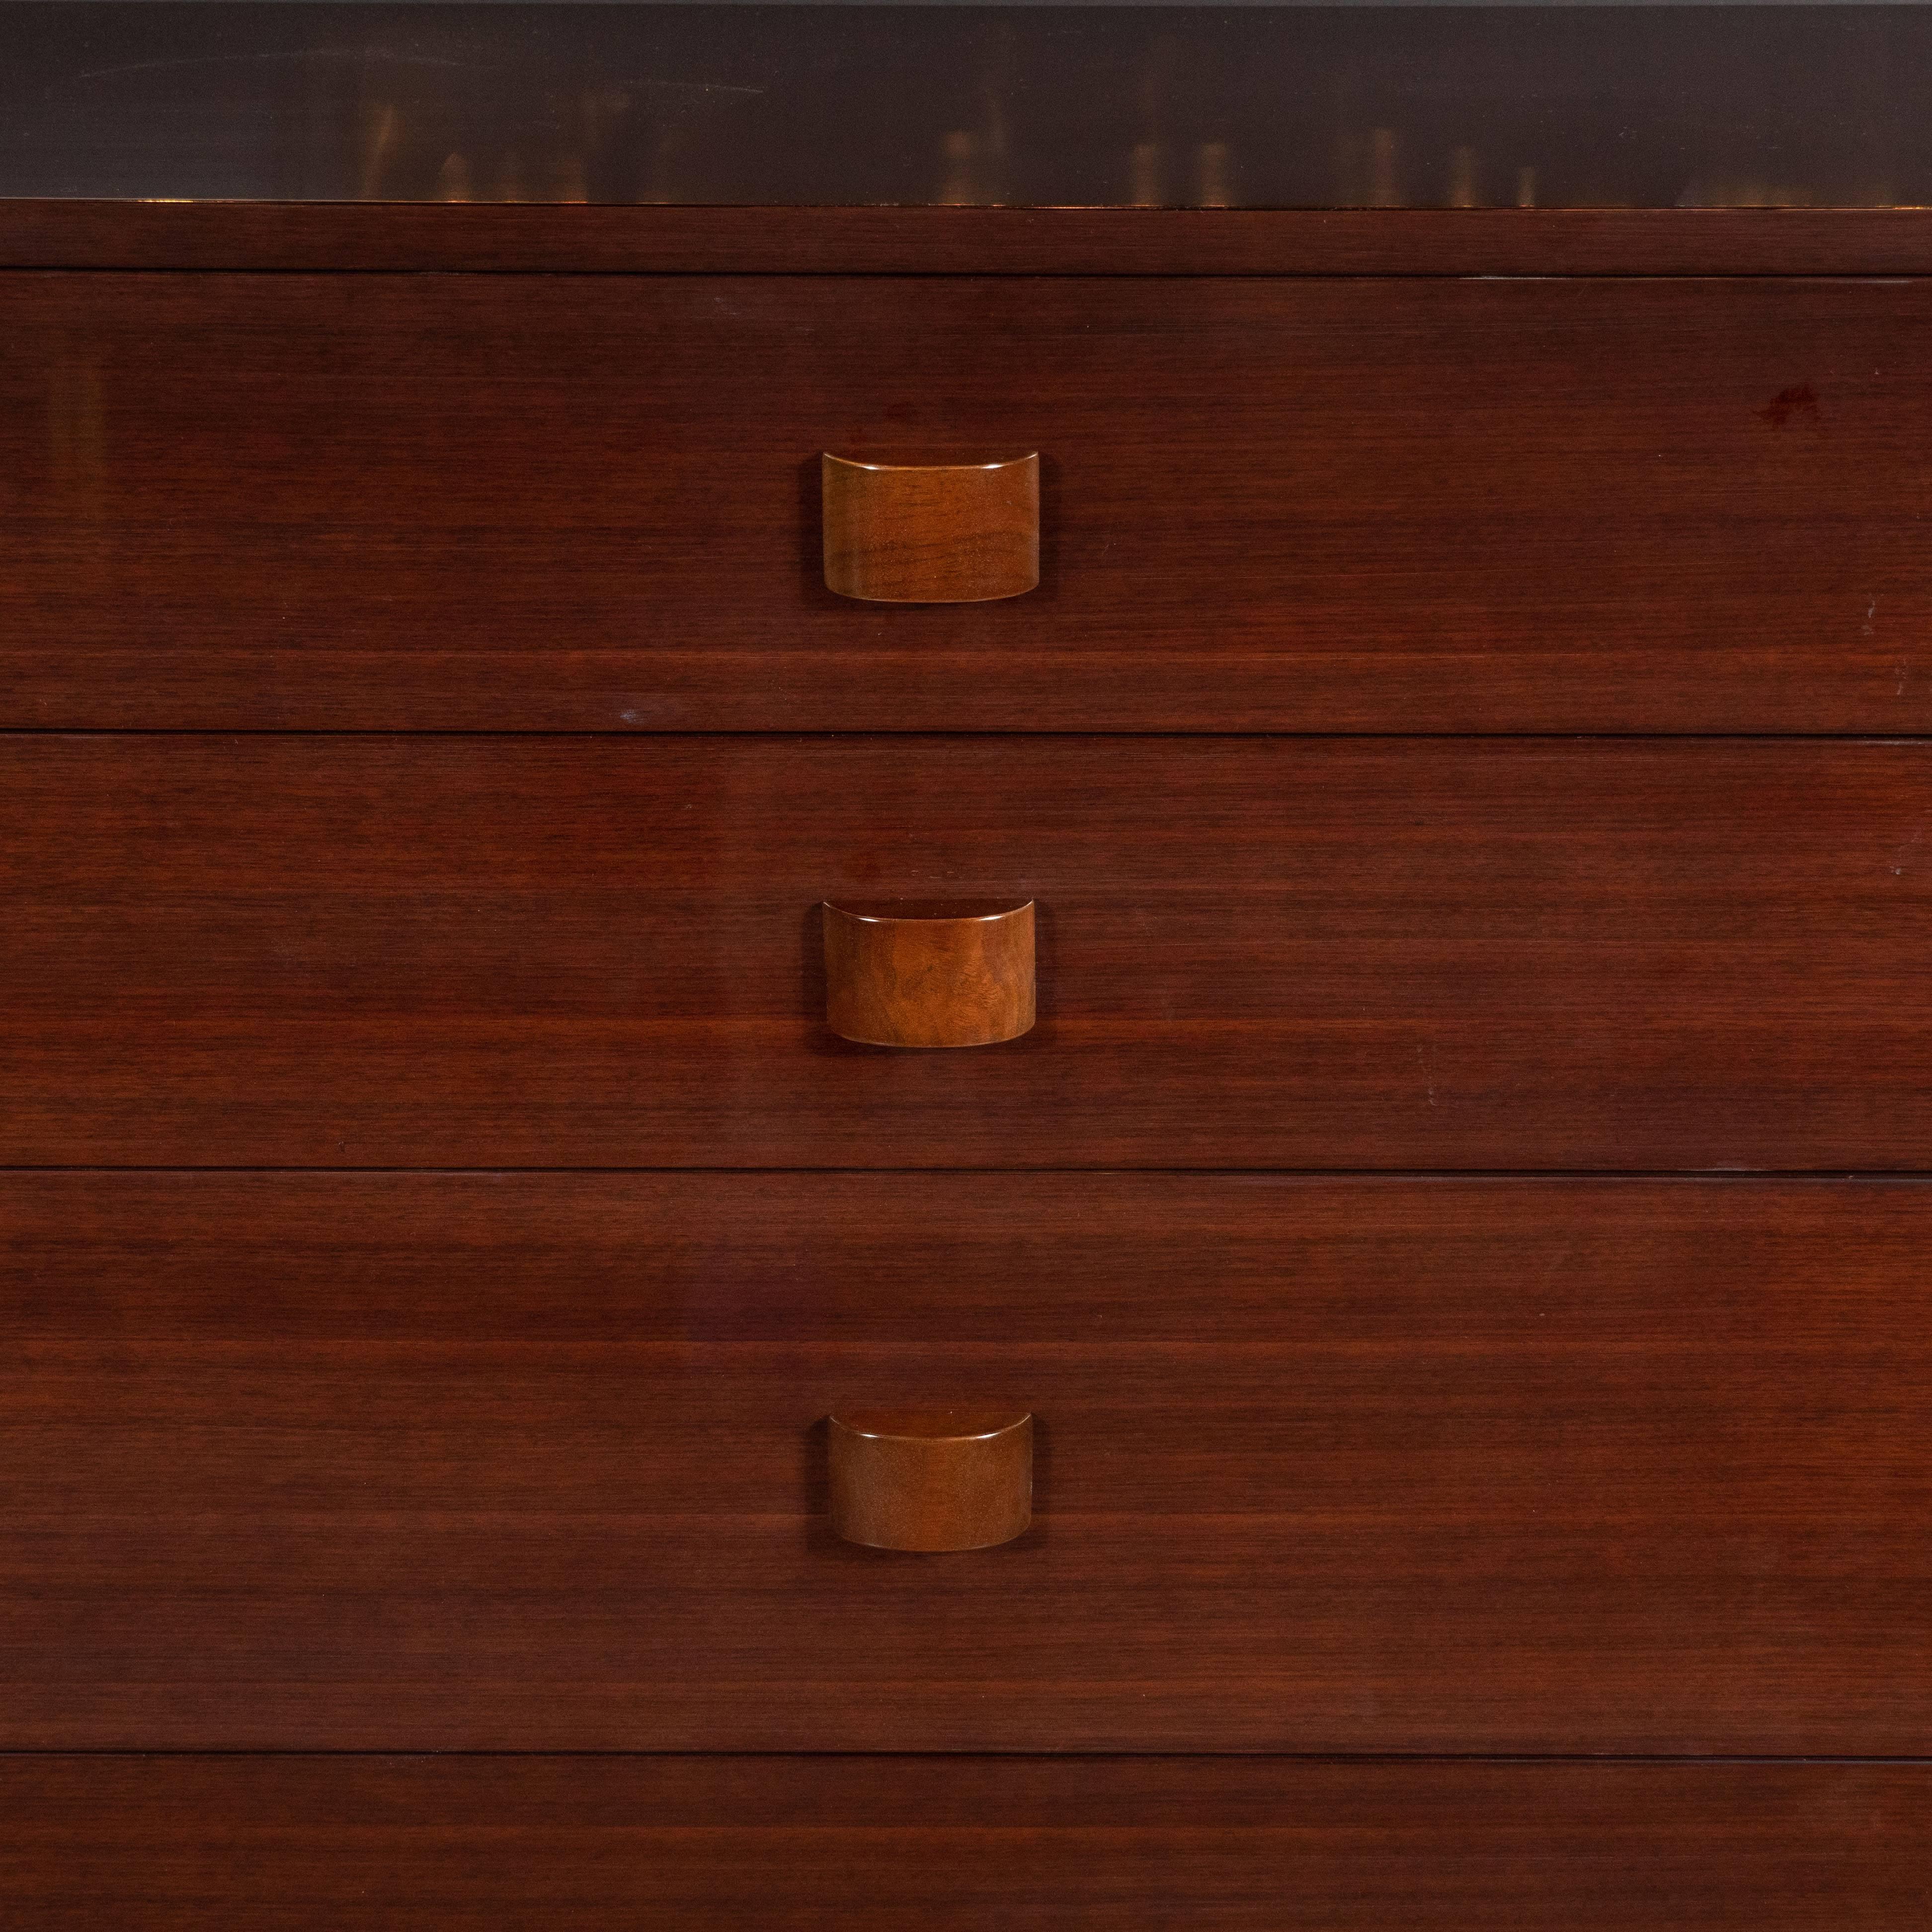 This refined and sophisticated high chest was realized by the fabled 20th century designer Gilbert Rohde for Herman Miller, circa 1942. It features a rectangular stepped skyscraper style base in ebonized walnut; and five drawers with streamlined